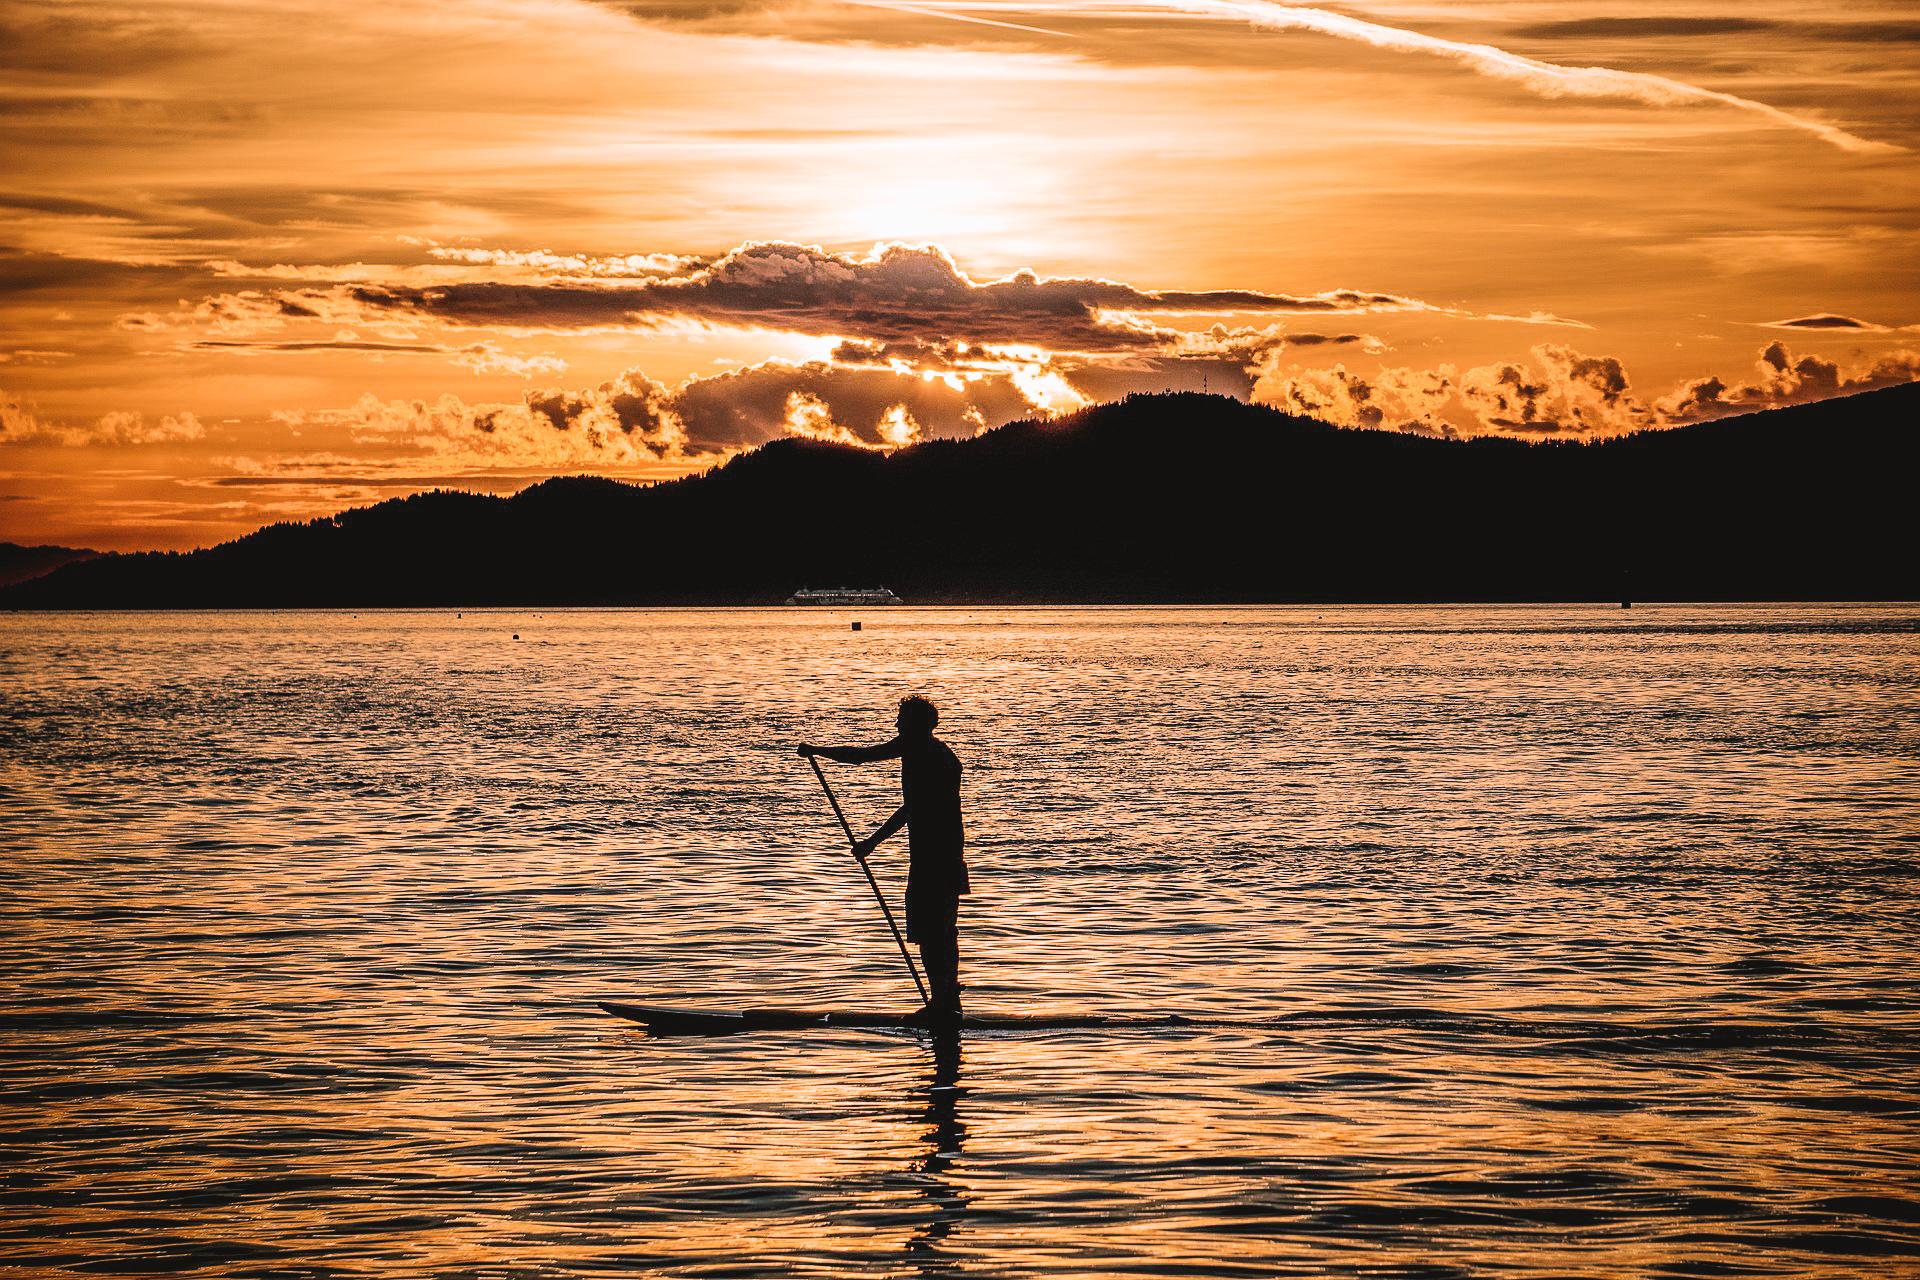 A man paddleboards on Laugarvatn Lake in Iceland